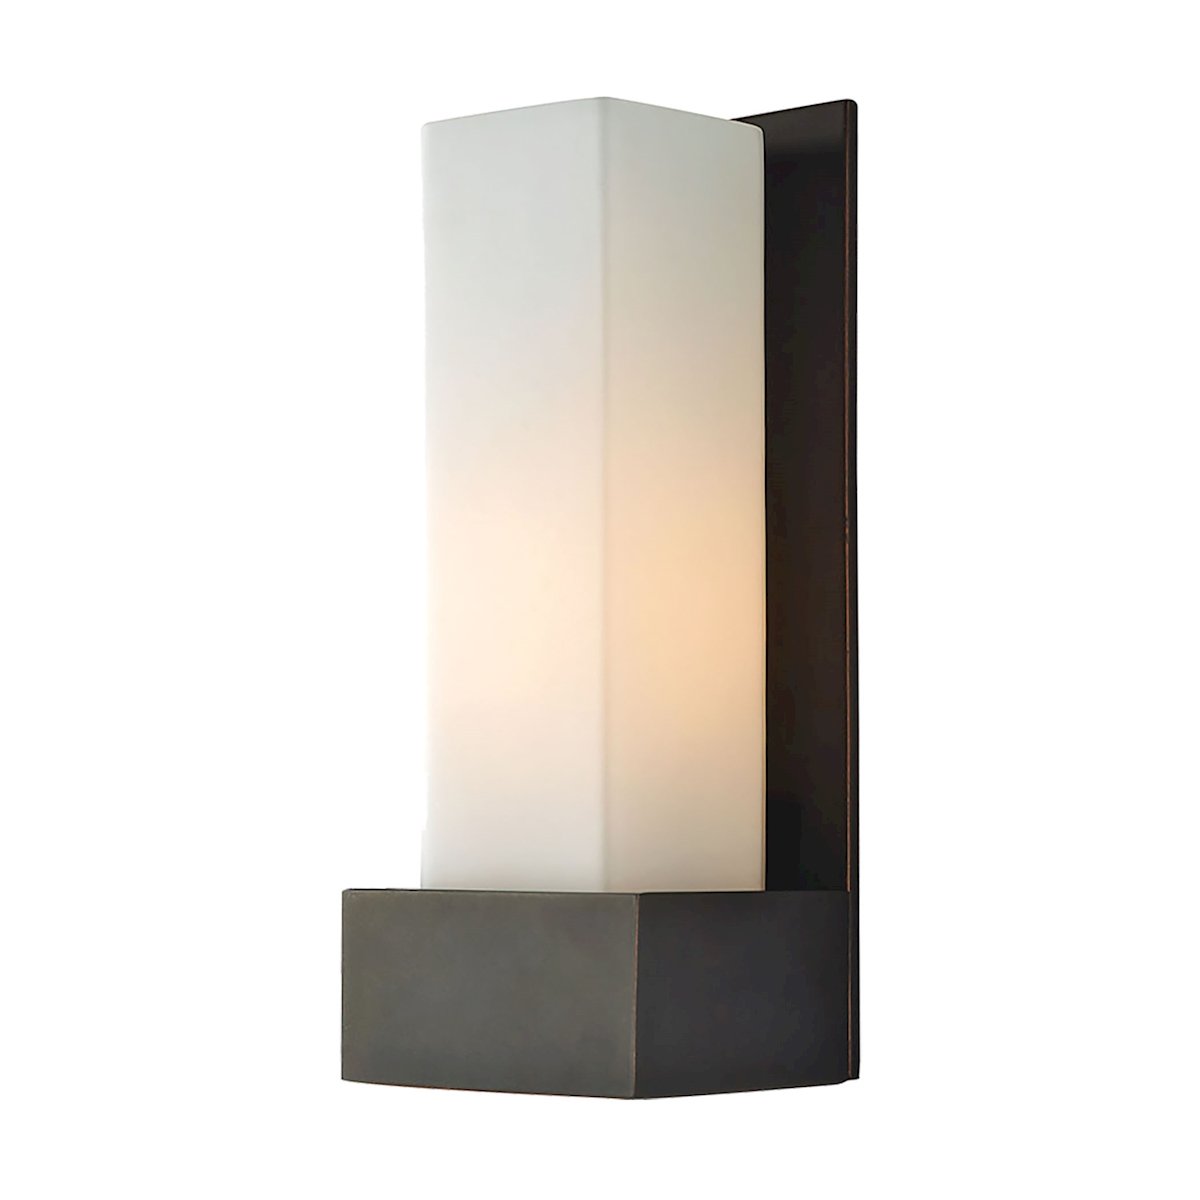 Solo Tall 1 Light Sconce In Oil Rubbed Bronze With White Opal Glass Wall Sconce Elk Lighting 